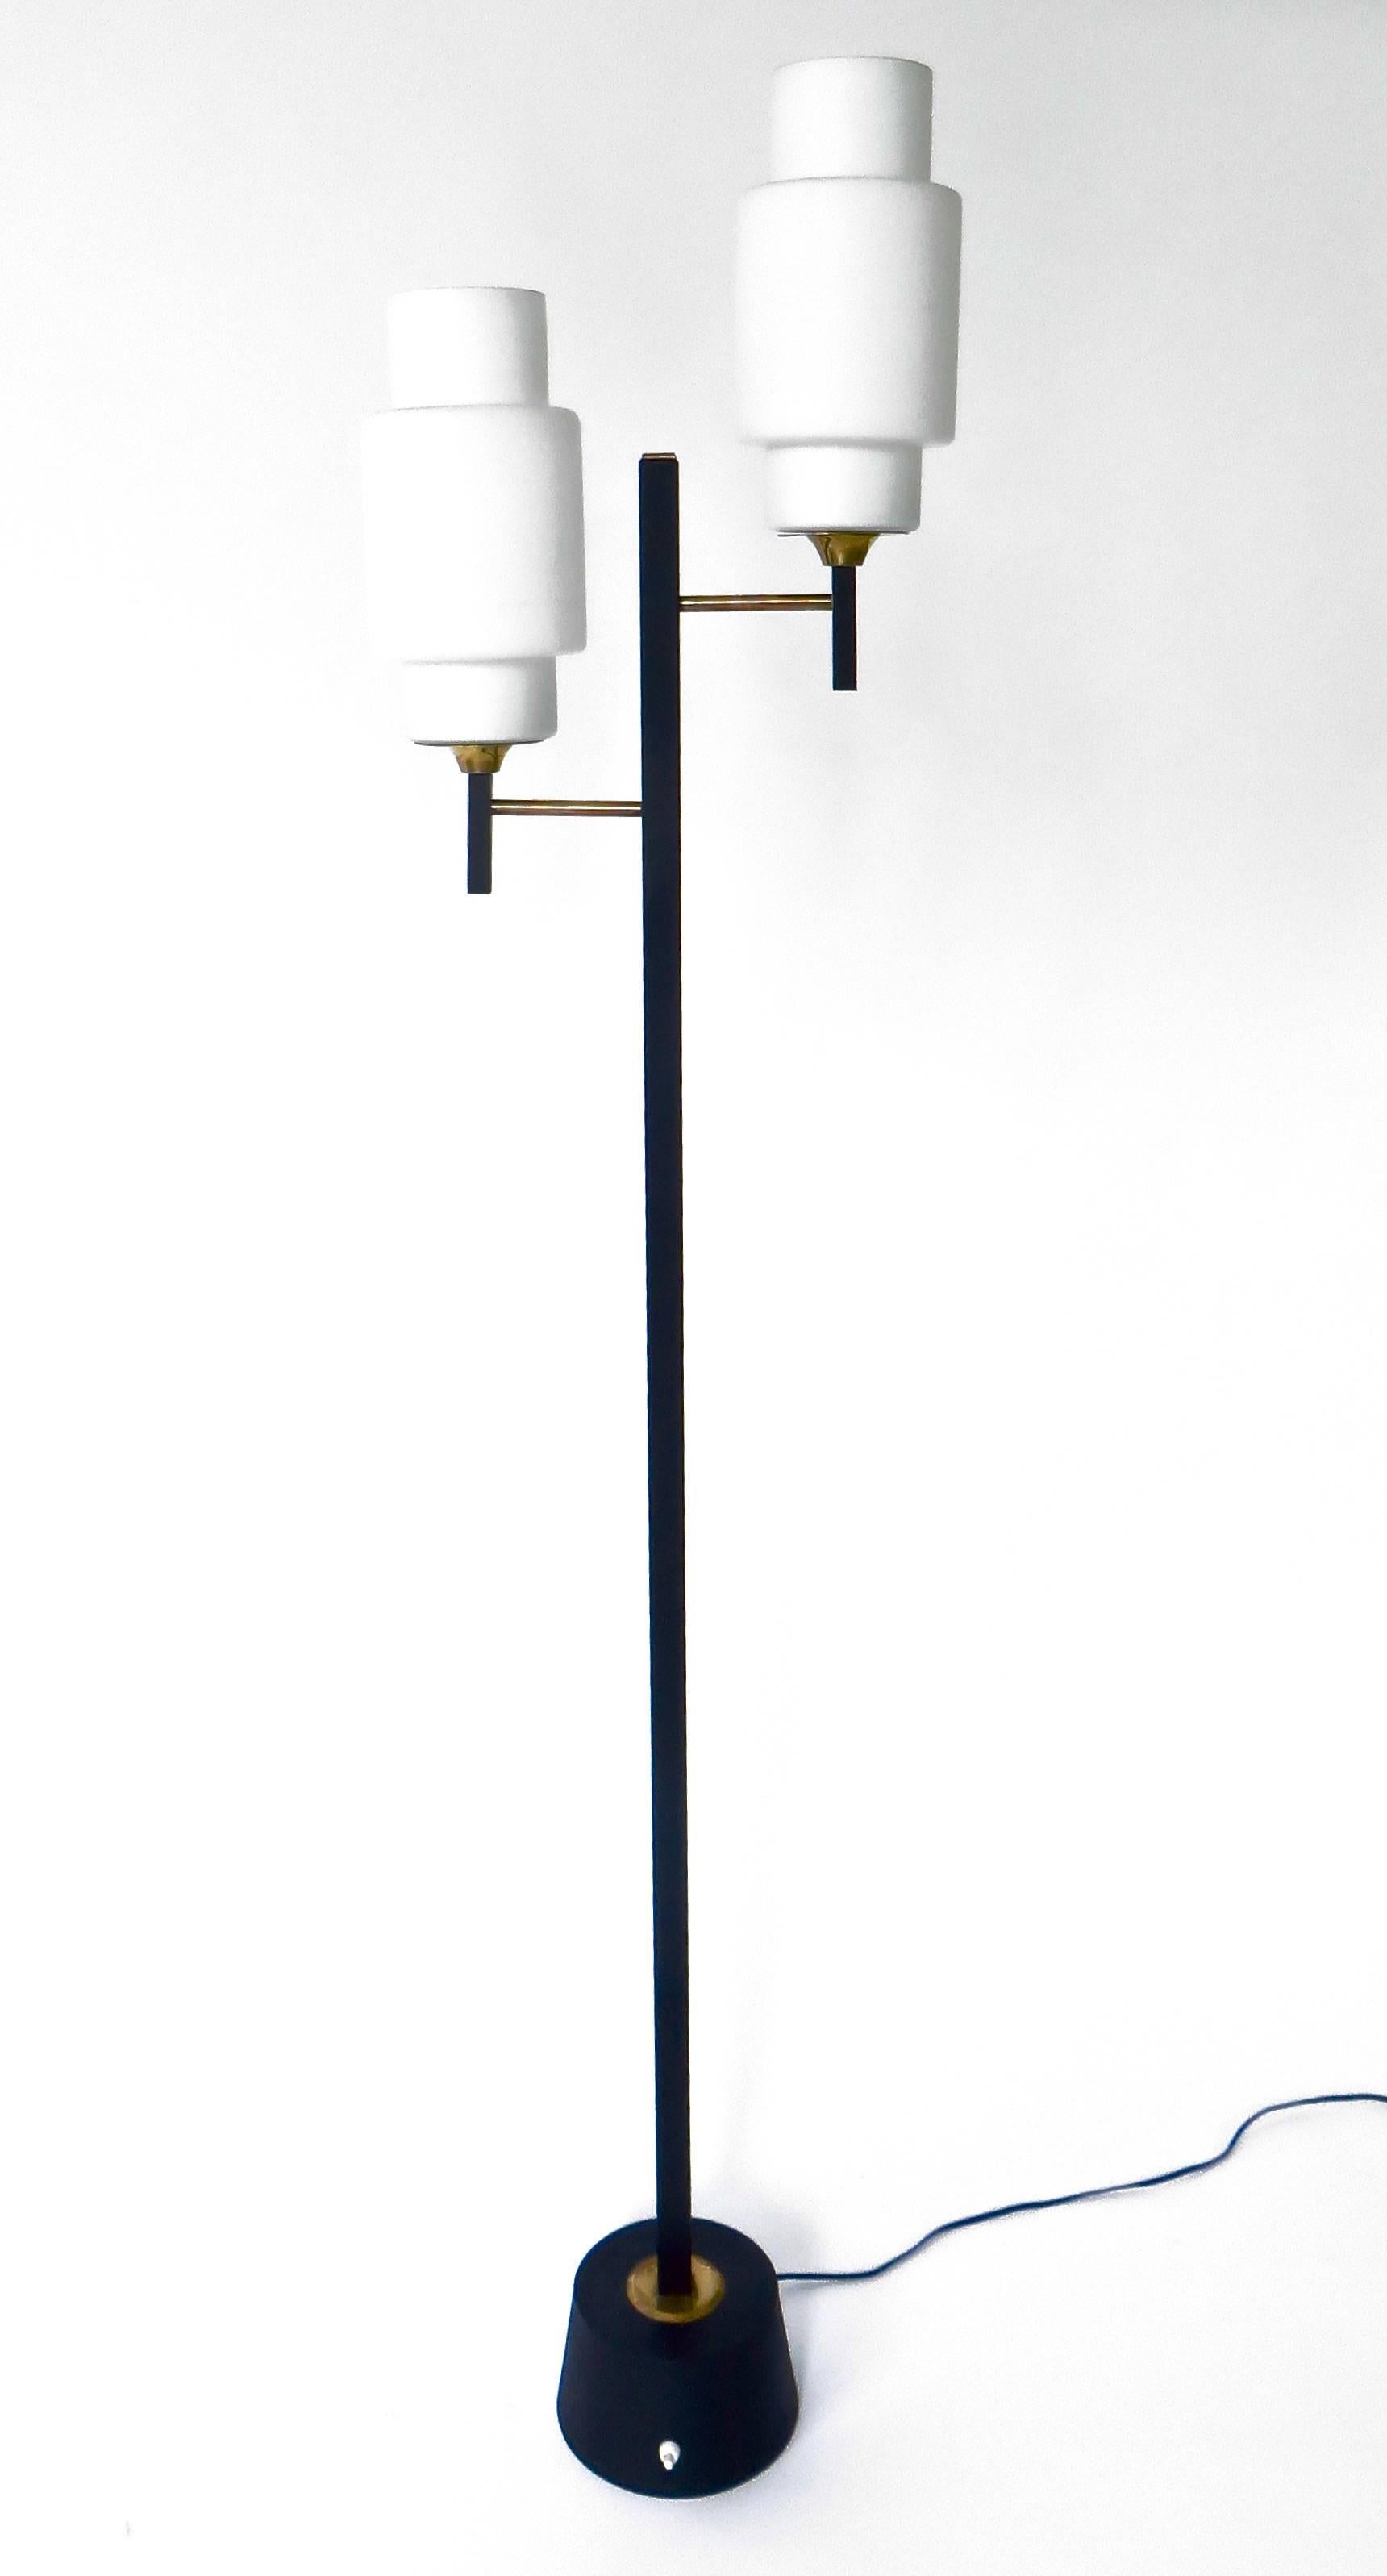 1950s French floor lamp by Maison Lunel with a square section arm resting on a round base decorated with a disc of brass.
On the upper part, two gilt brass rods support two large cylindrical opaline glass shades.
The lamp terminates on a very